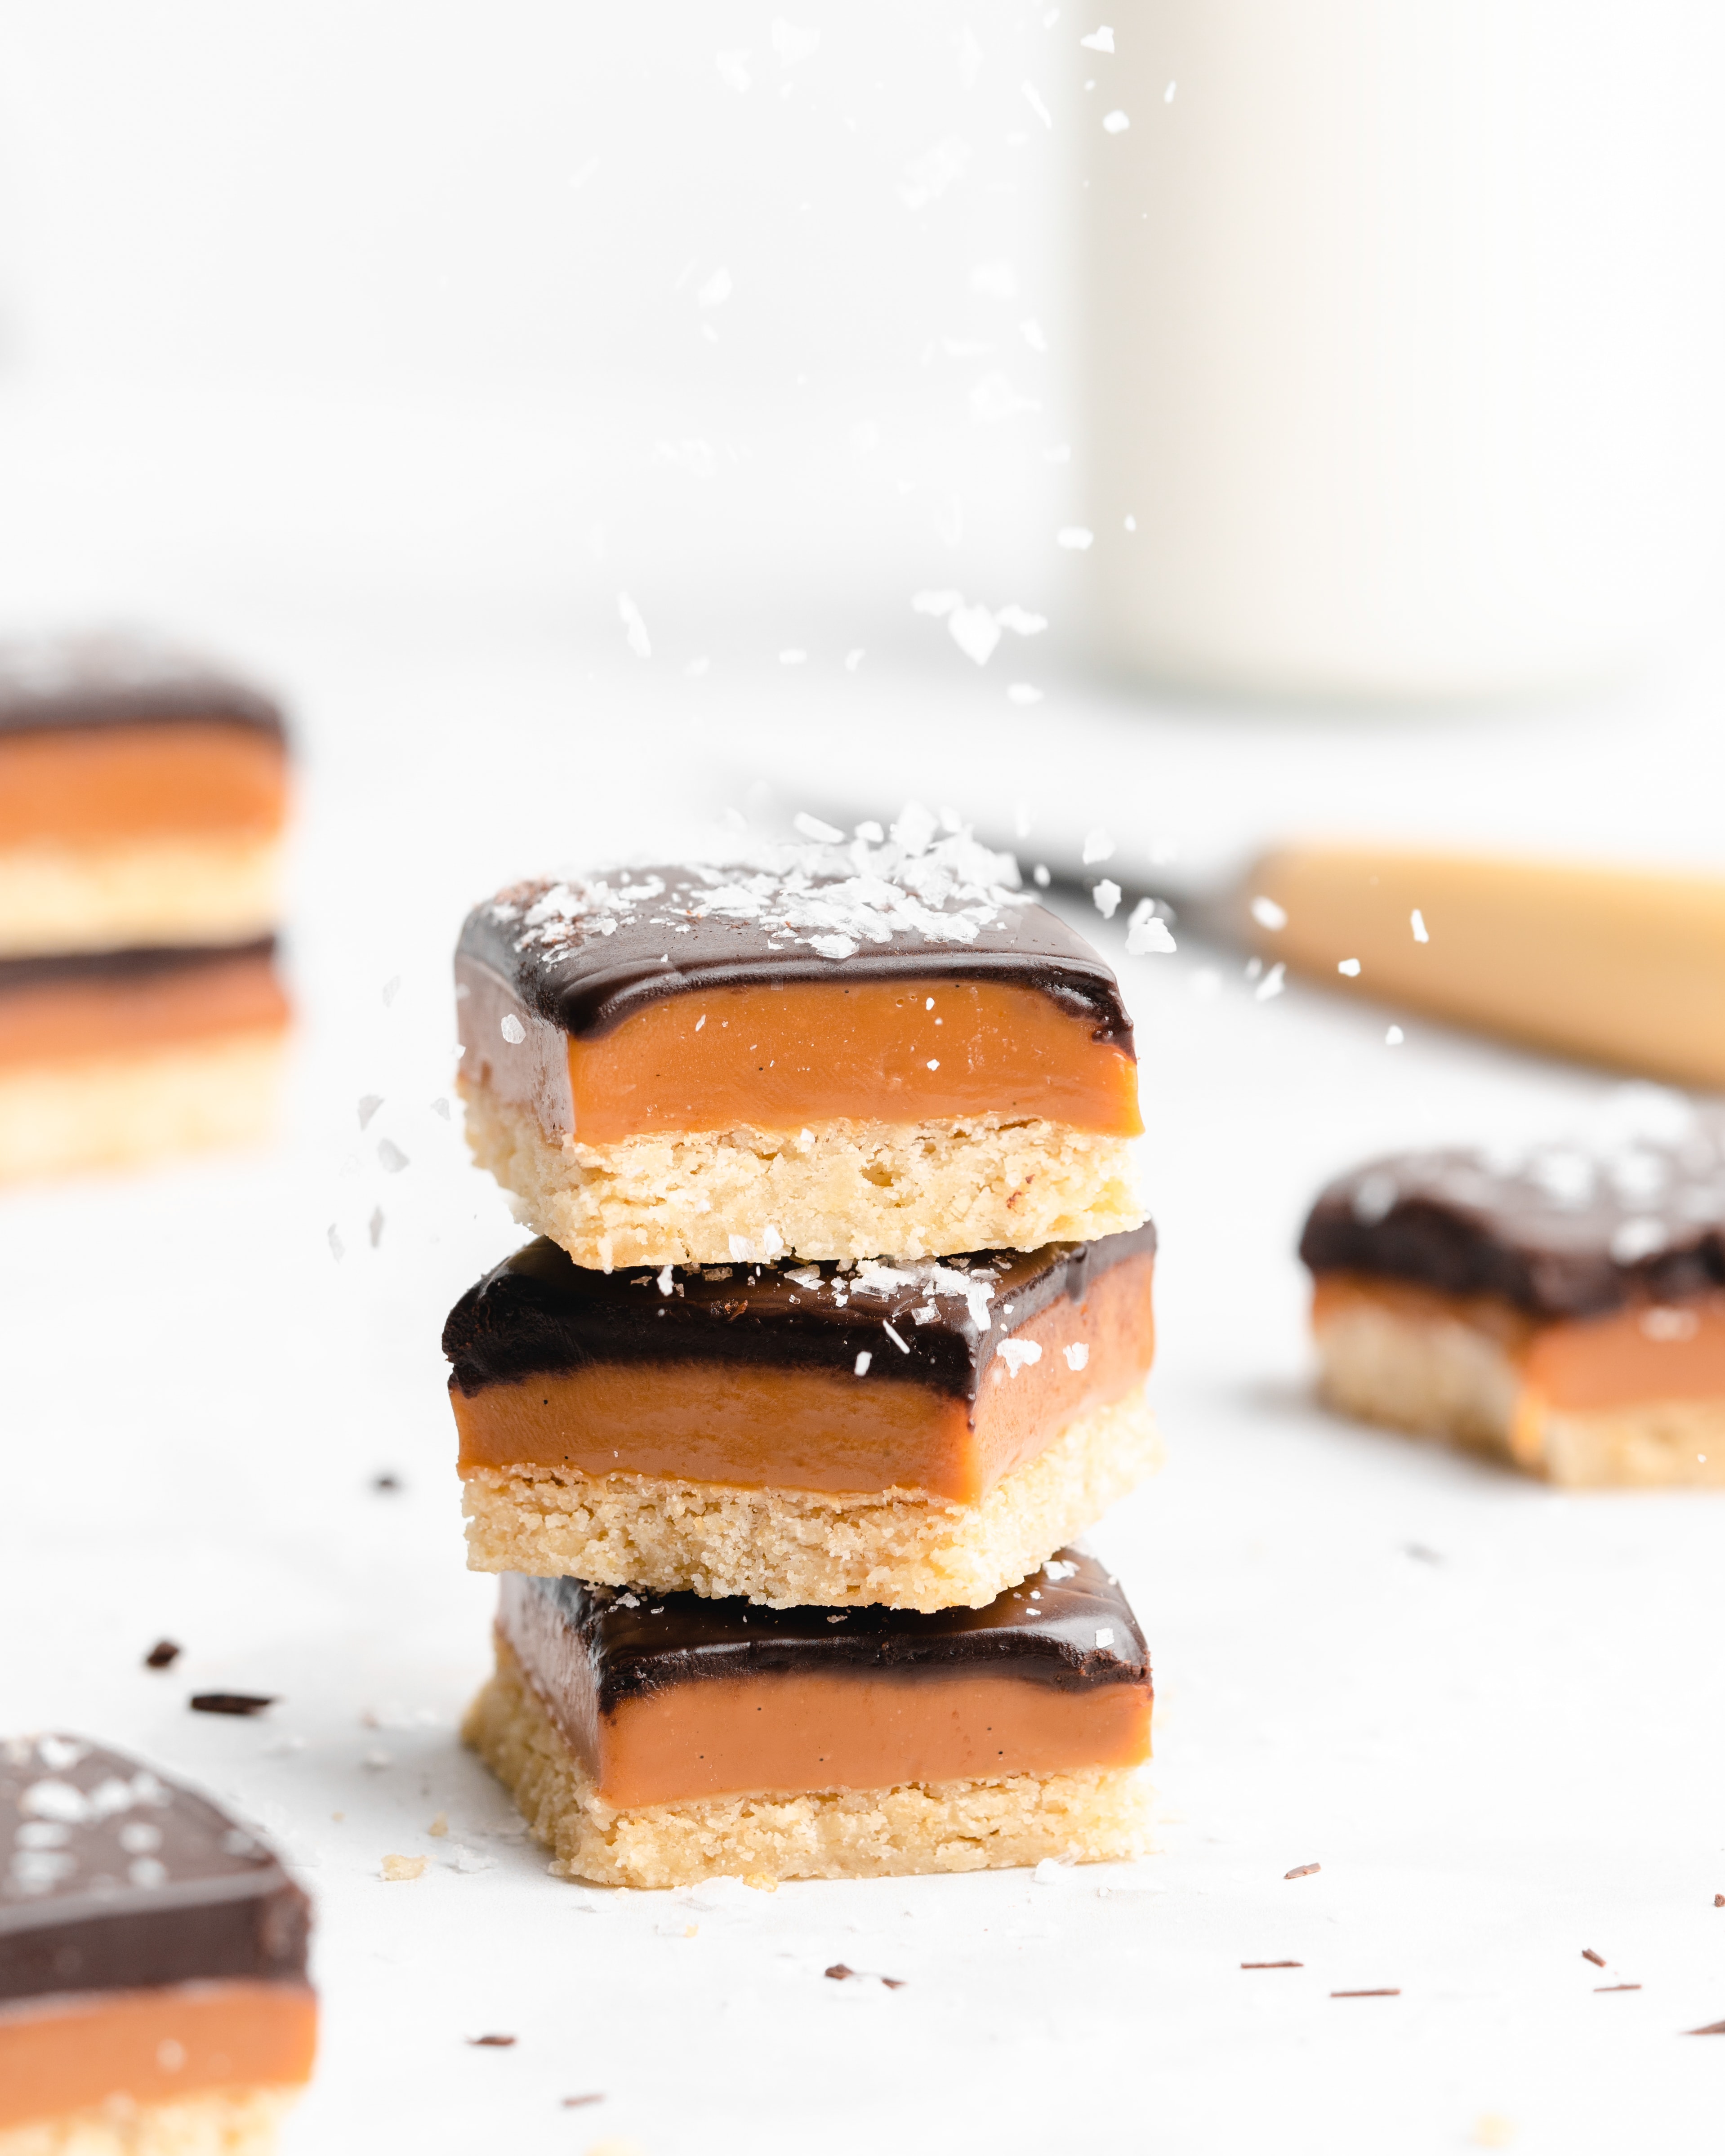 A rich, creamy shortbread covered with a golden caramel cream, topped with vanilla bean bourbon, topped with a layer of dark chocolate and sea salt.